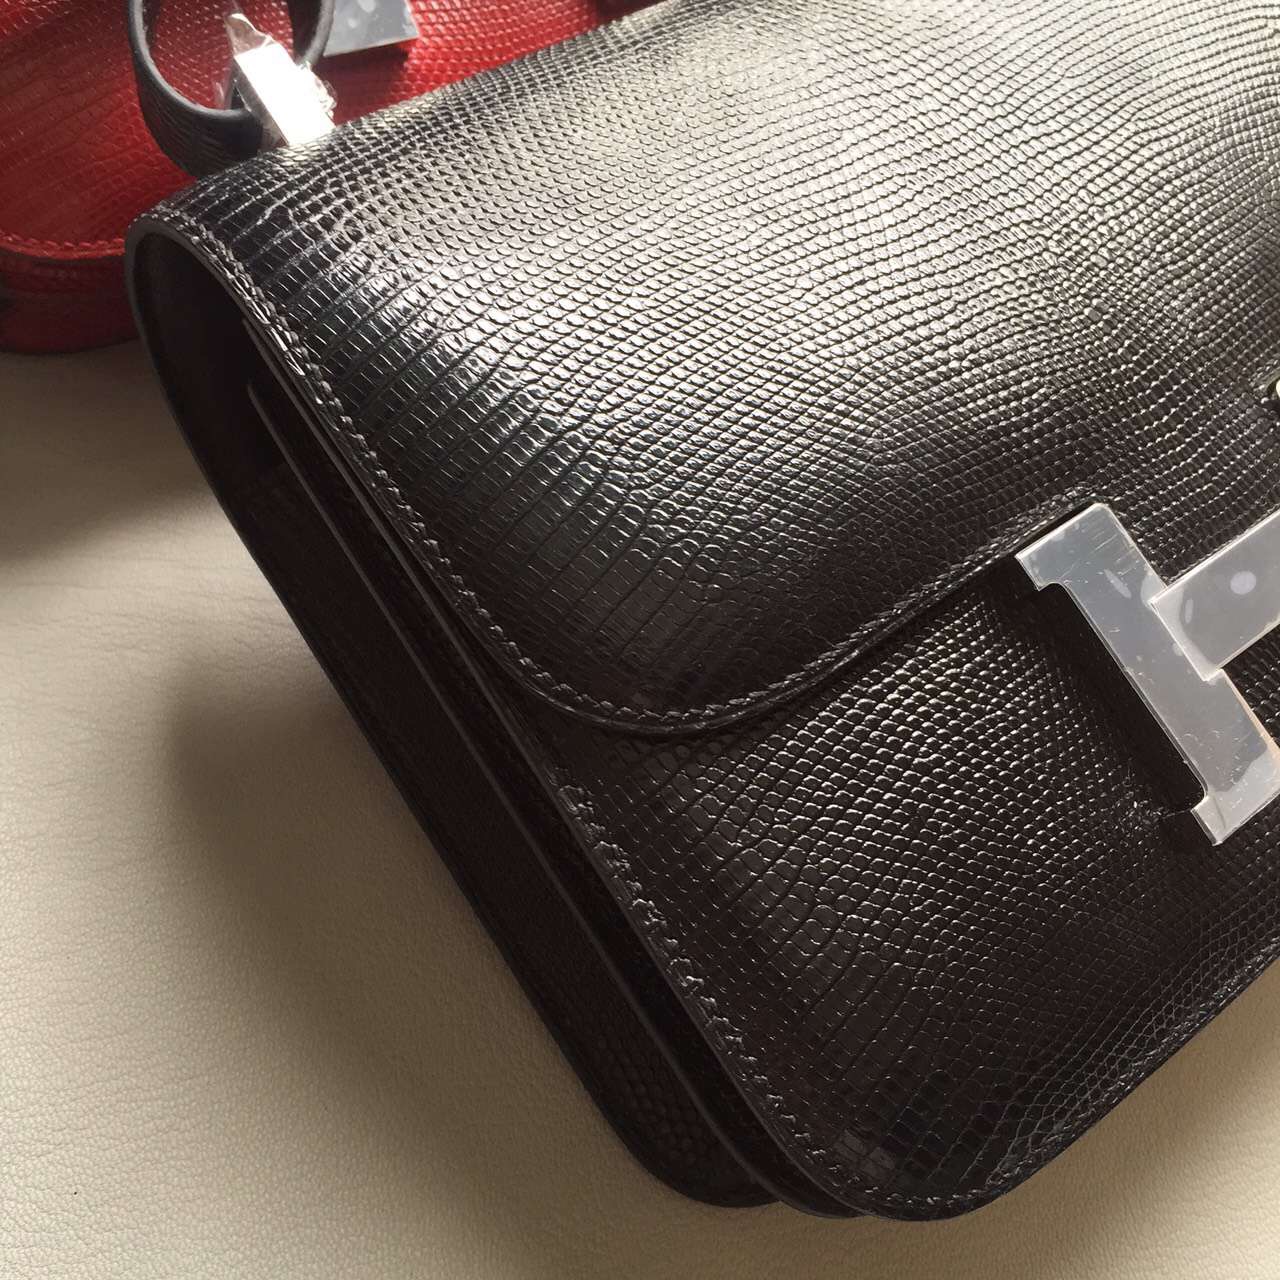 Hand Stitching Hermes Shiny Lizard Leather Constance Bag in CK89 Black